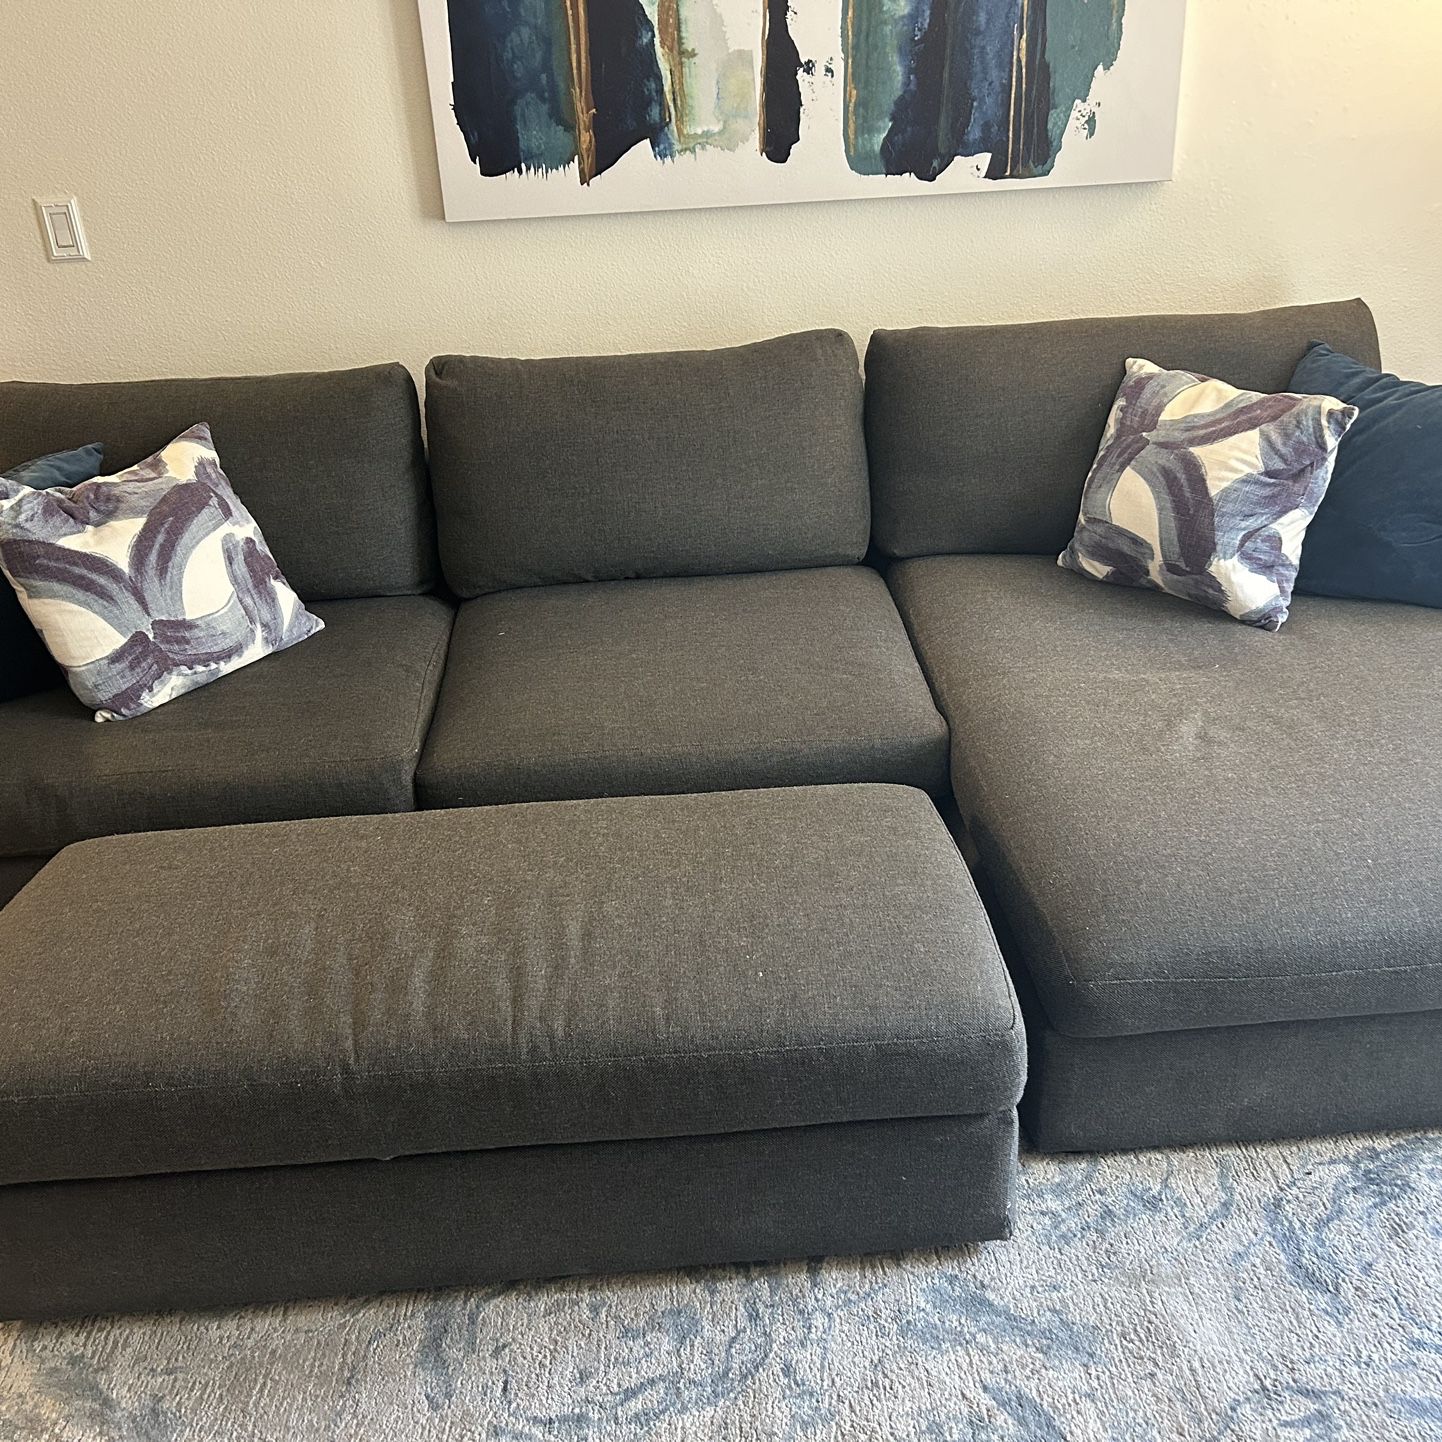 Large Grey Sectional Couch With Oversized chaise & Storage Ottomon